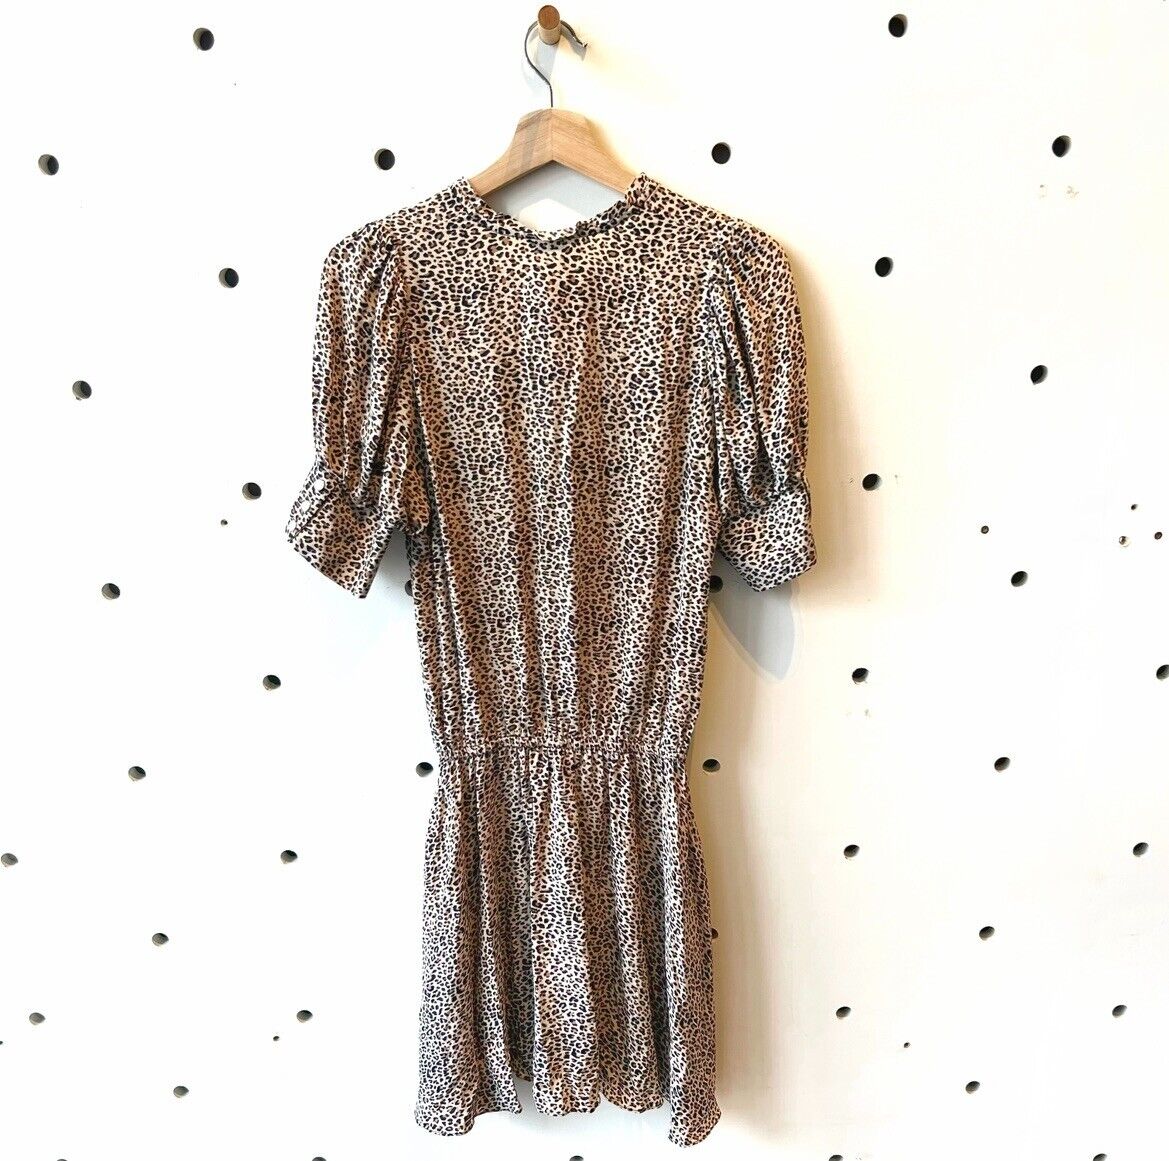 XS - Zadig & Voltaire Russel Leopard Patterned Leo Fit & Flare Dress 0516MH